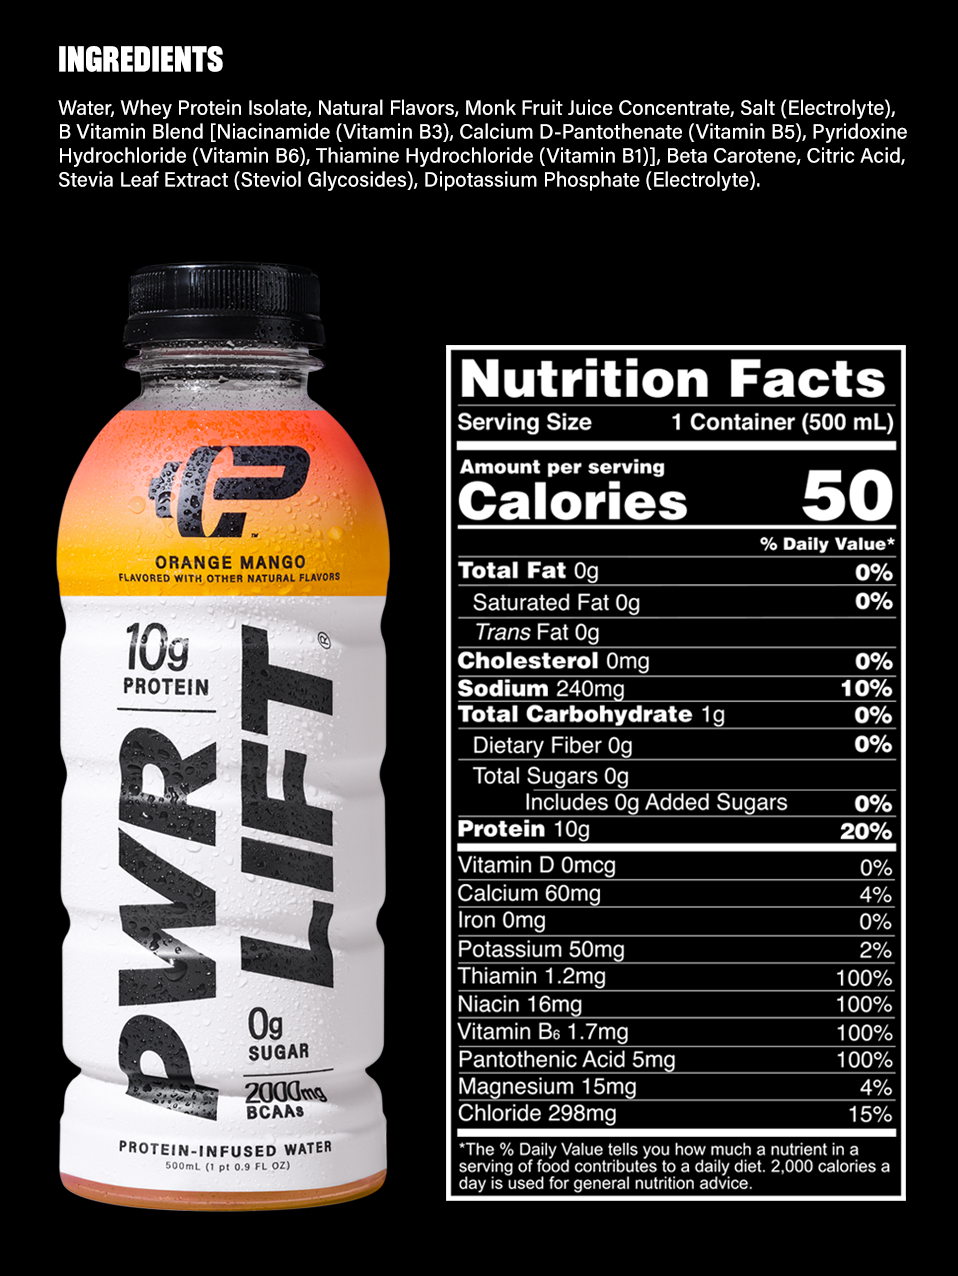 PWR LIFT Orange Mango Ingredients and Nutritional Facts